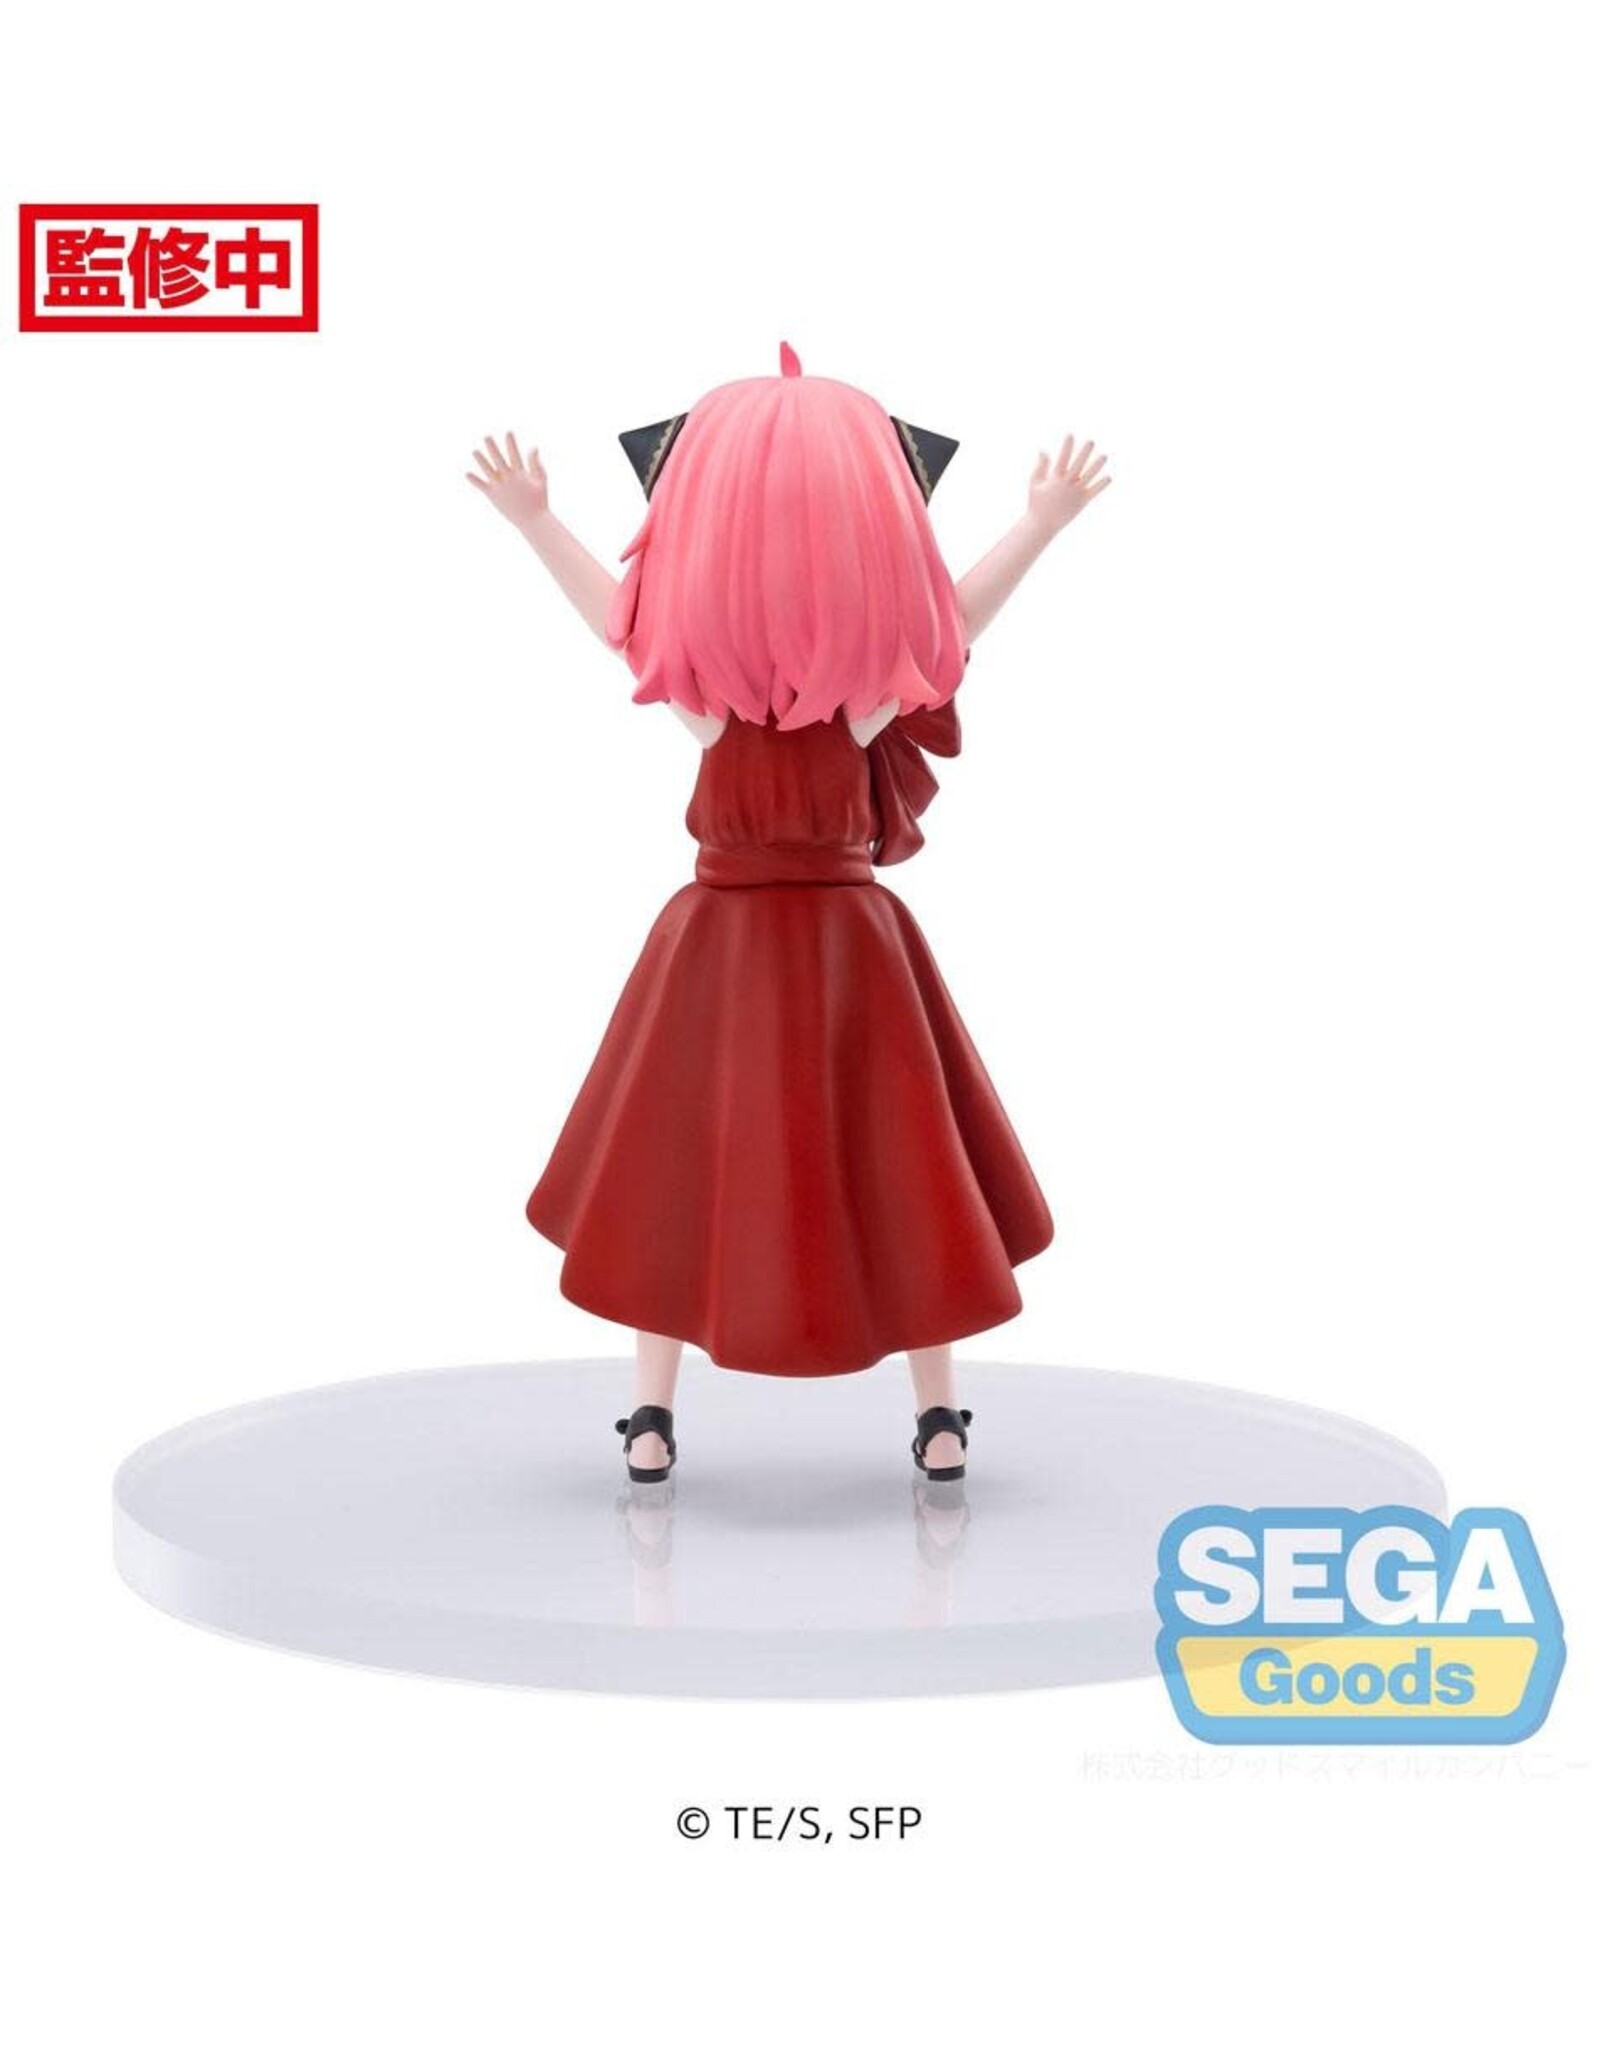 Spy x Family - Anya Forger Party Ver. PM PVC Statue - 11 cm